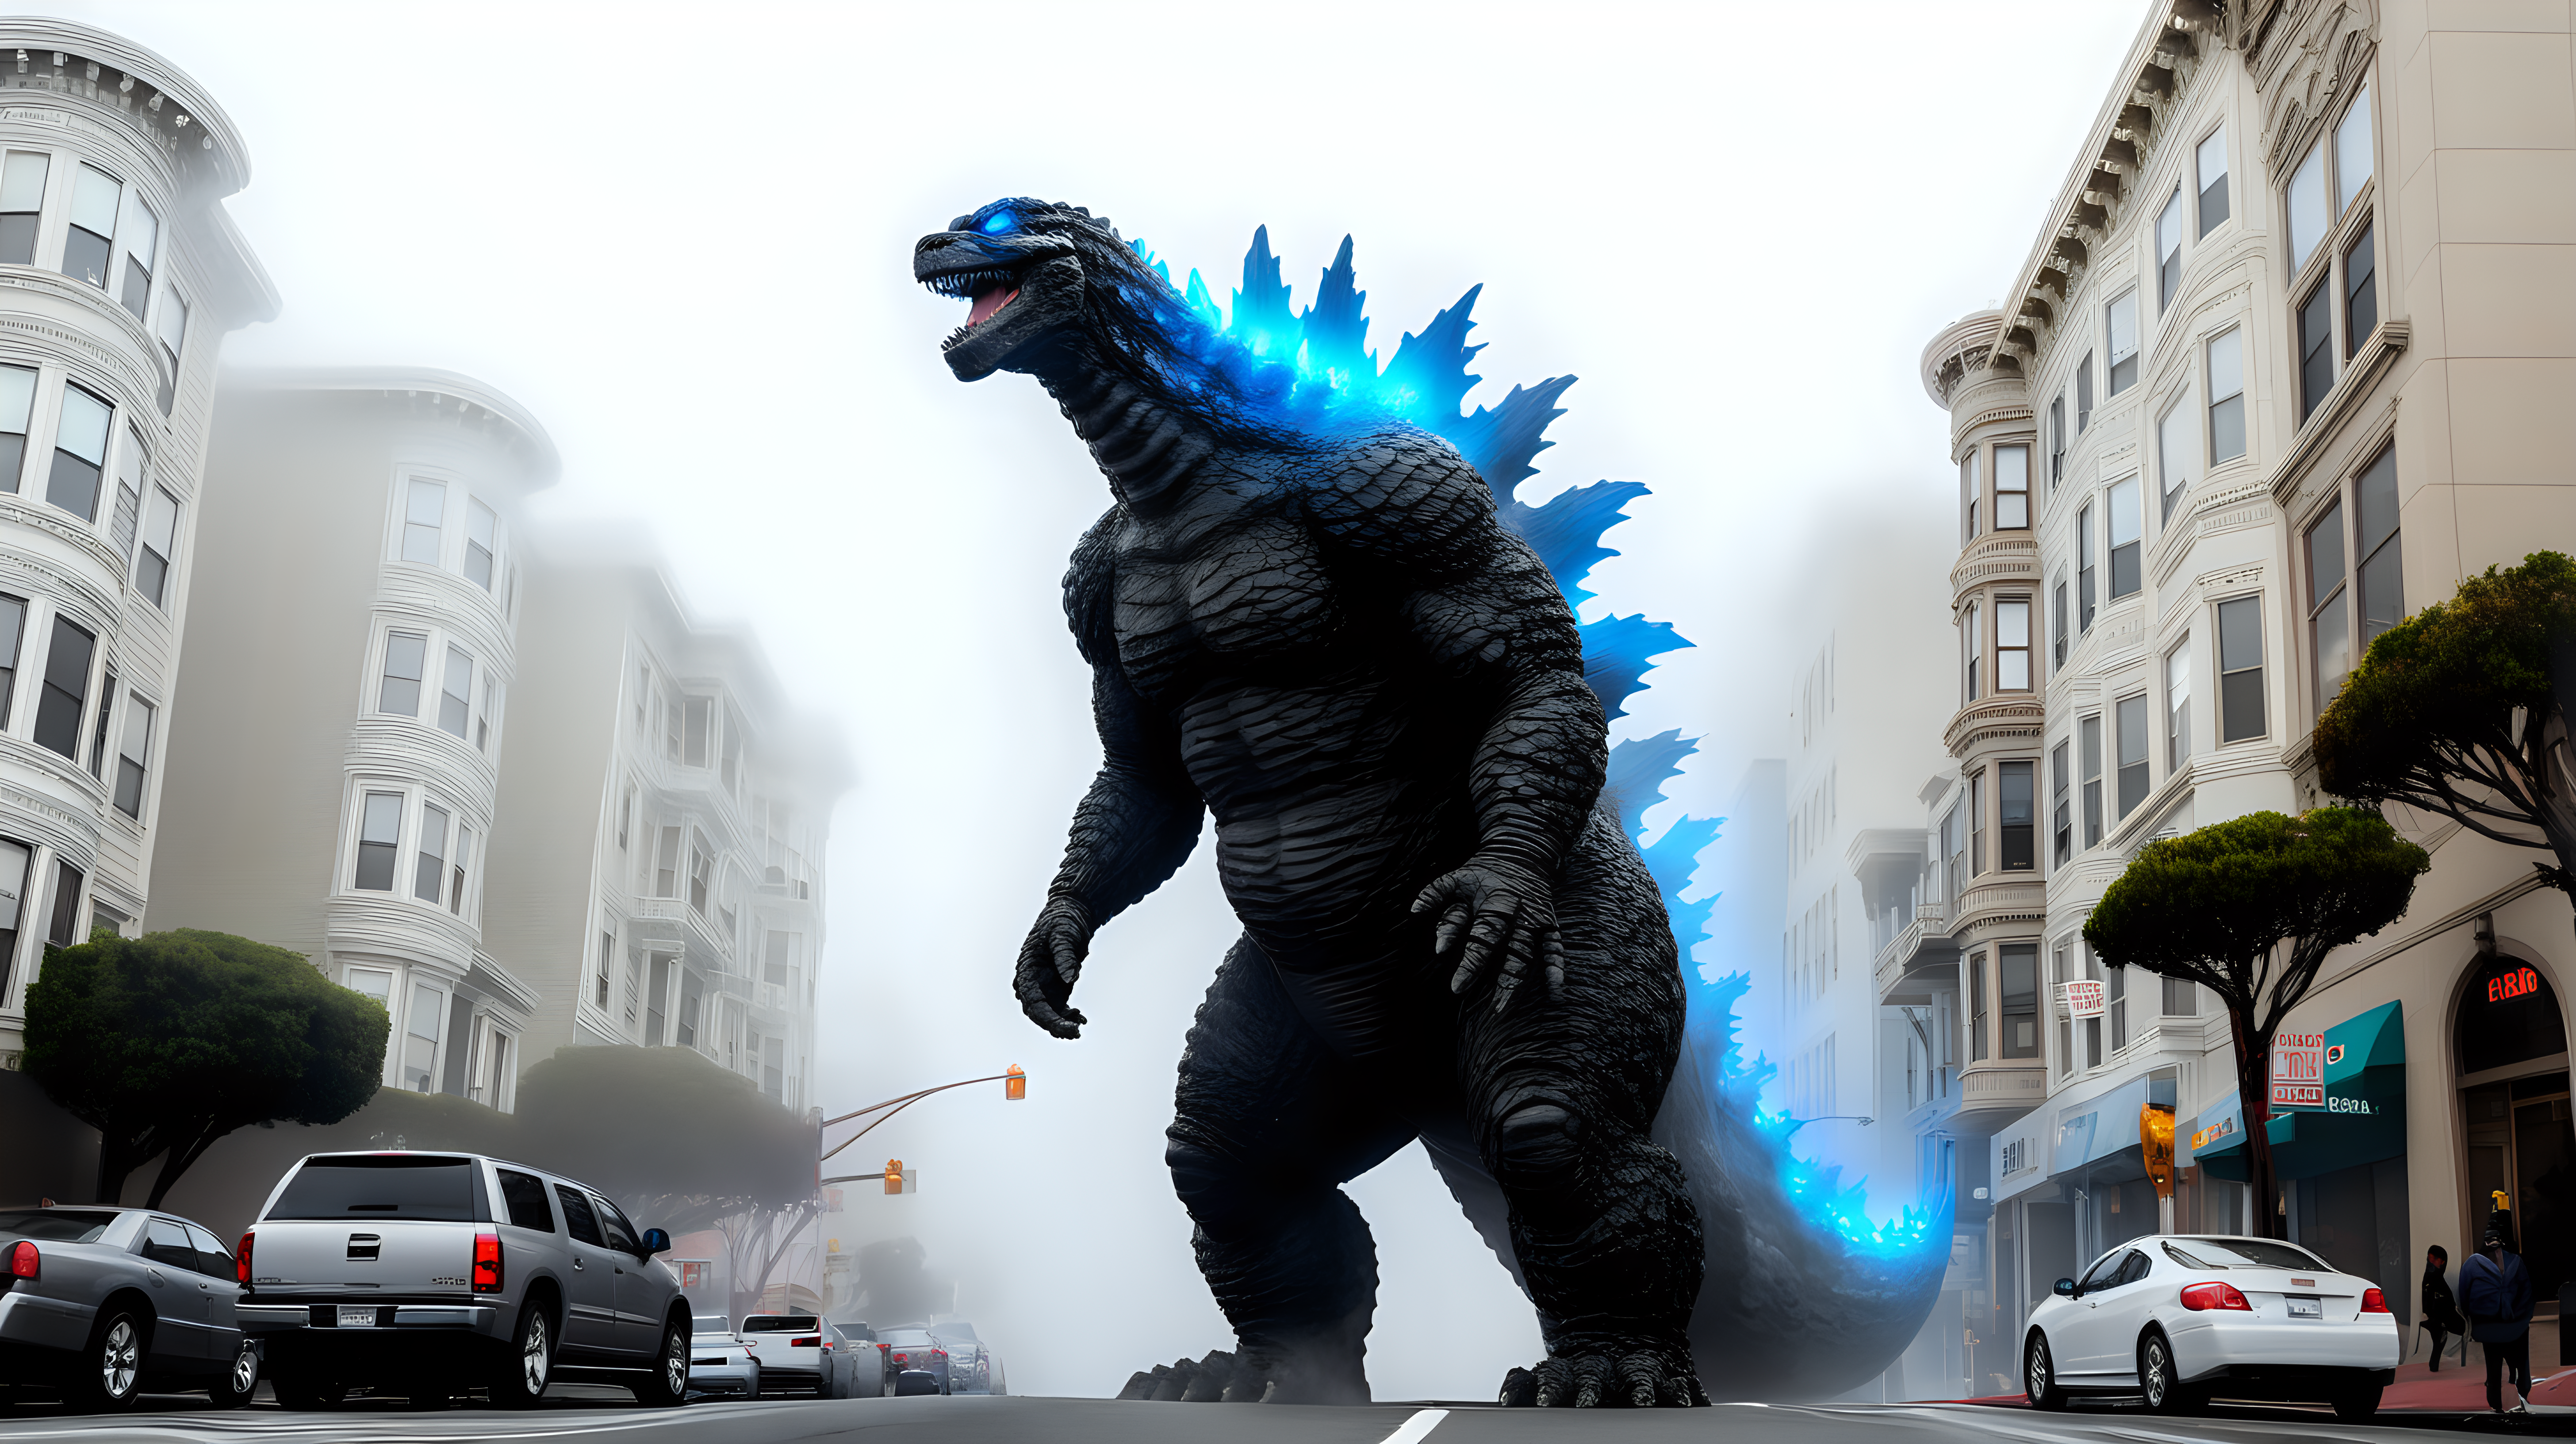 Godzilla on the streets of San Francisco in